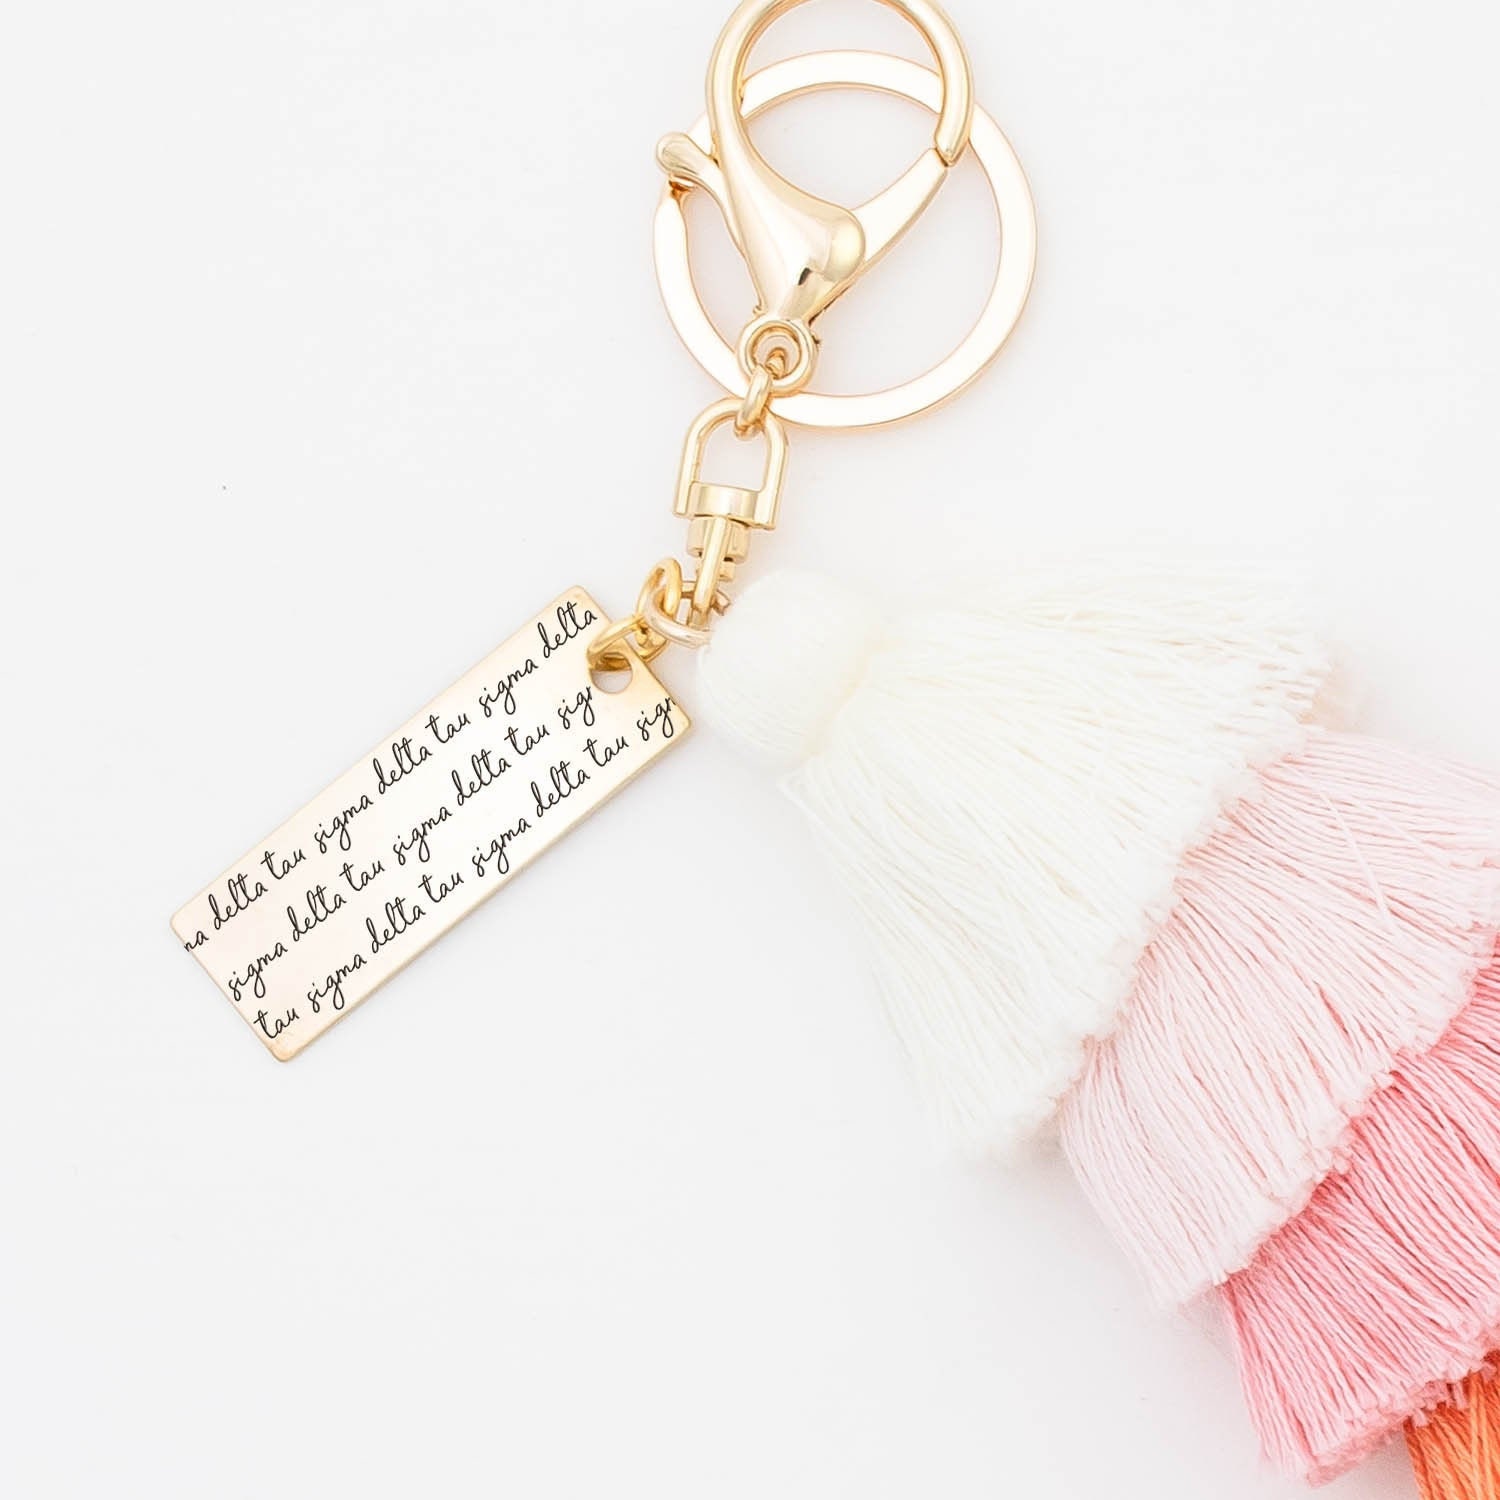 Sigma Delta Tau Keychain, Sdt Tassel S D T Sorority Gift, Sig Key Chain With Ombre Tassel, Big Little Gift